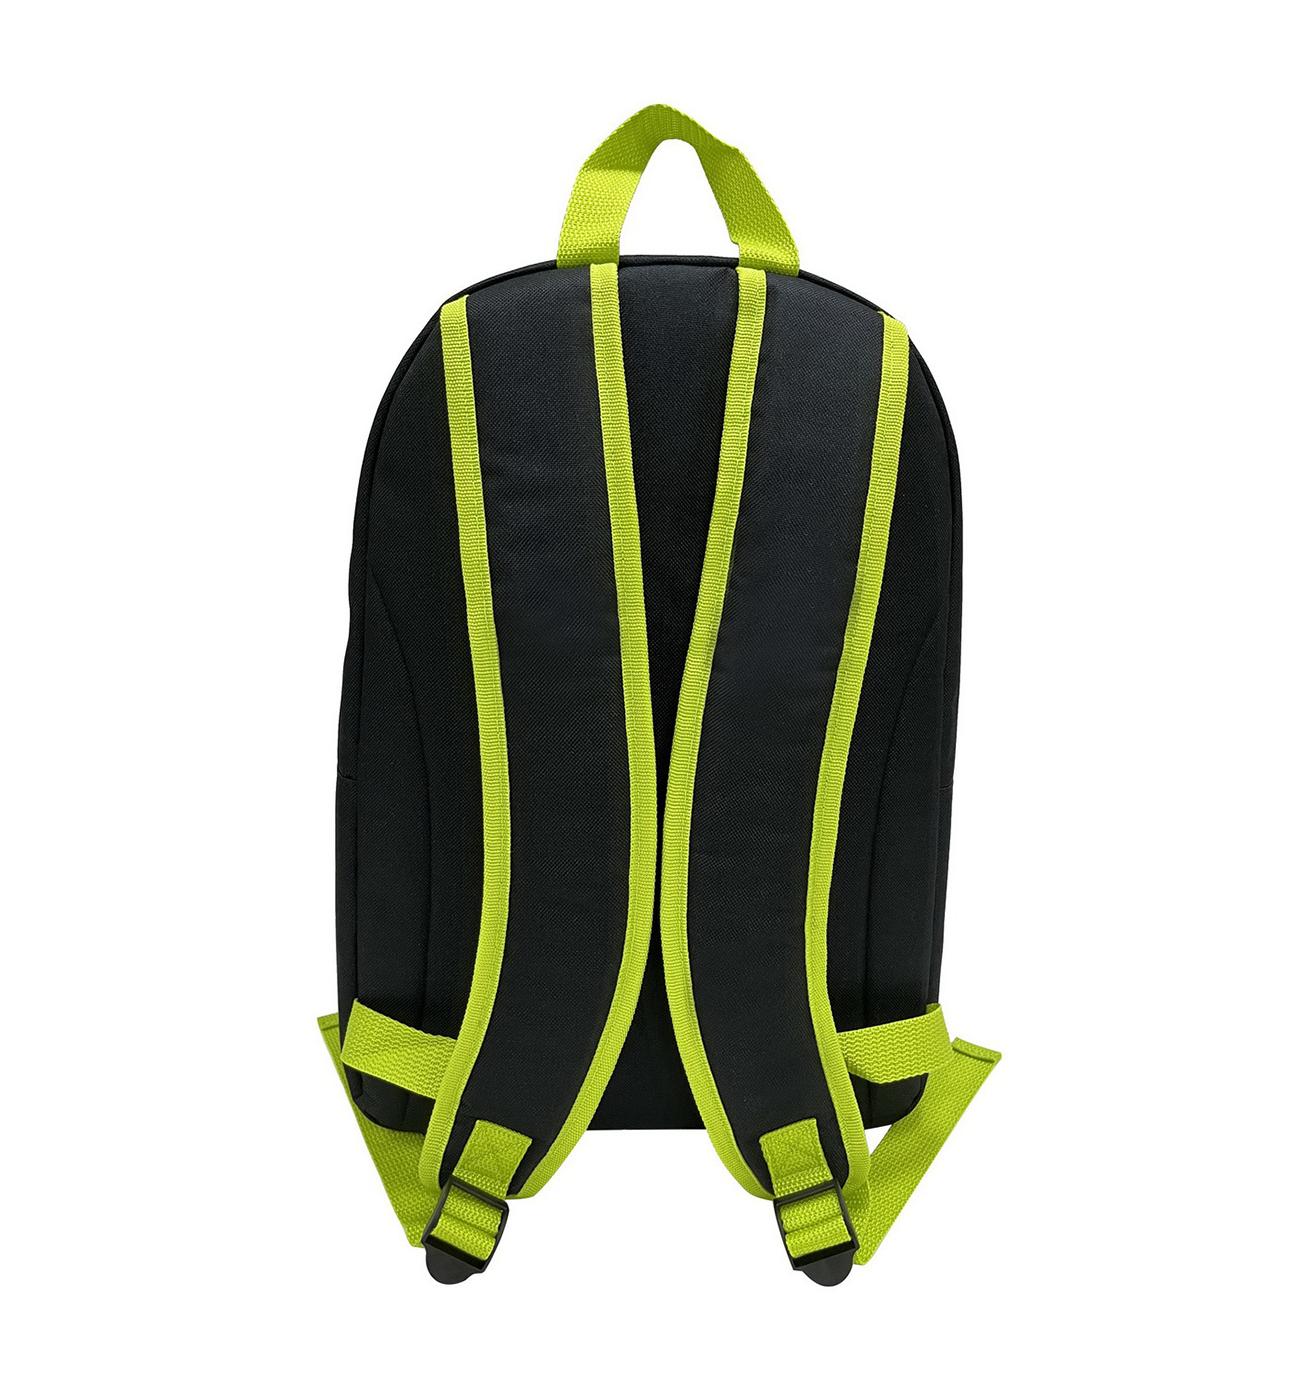 Tech Gear Classic Backpack - Black & Green; image 3 of 4